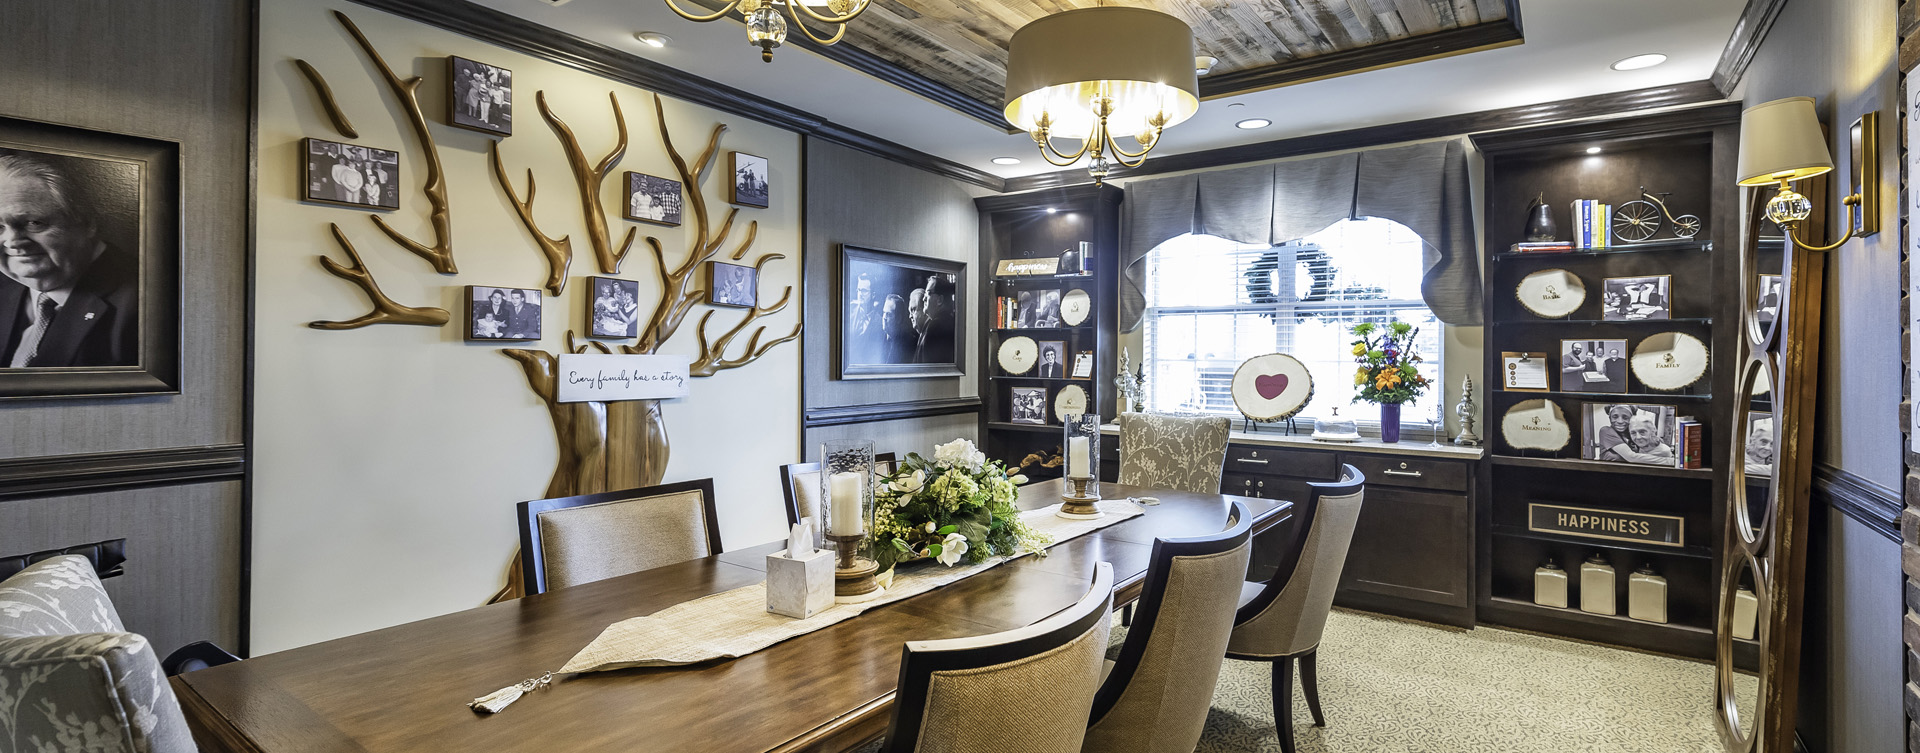 Food is best when shared with family and friends in the private dining room at Bickford of Canton